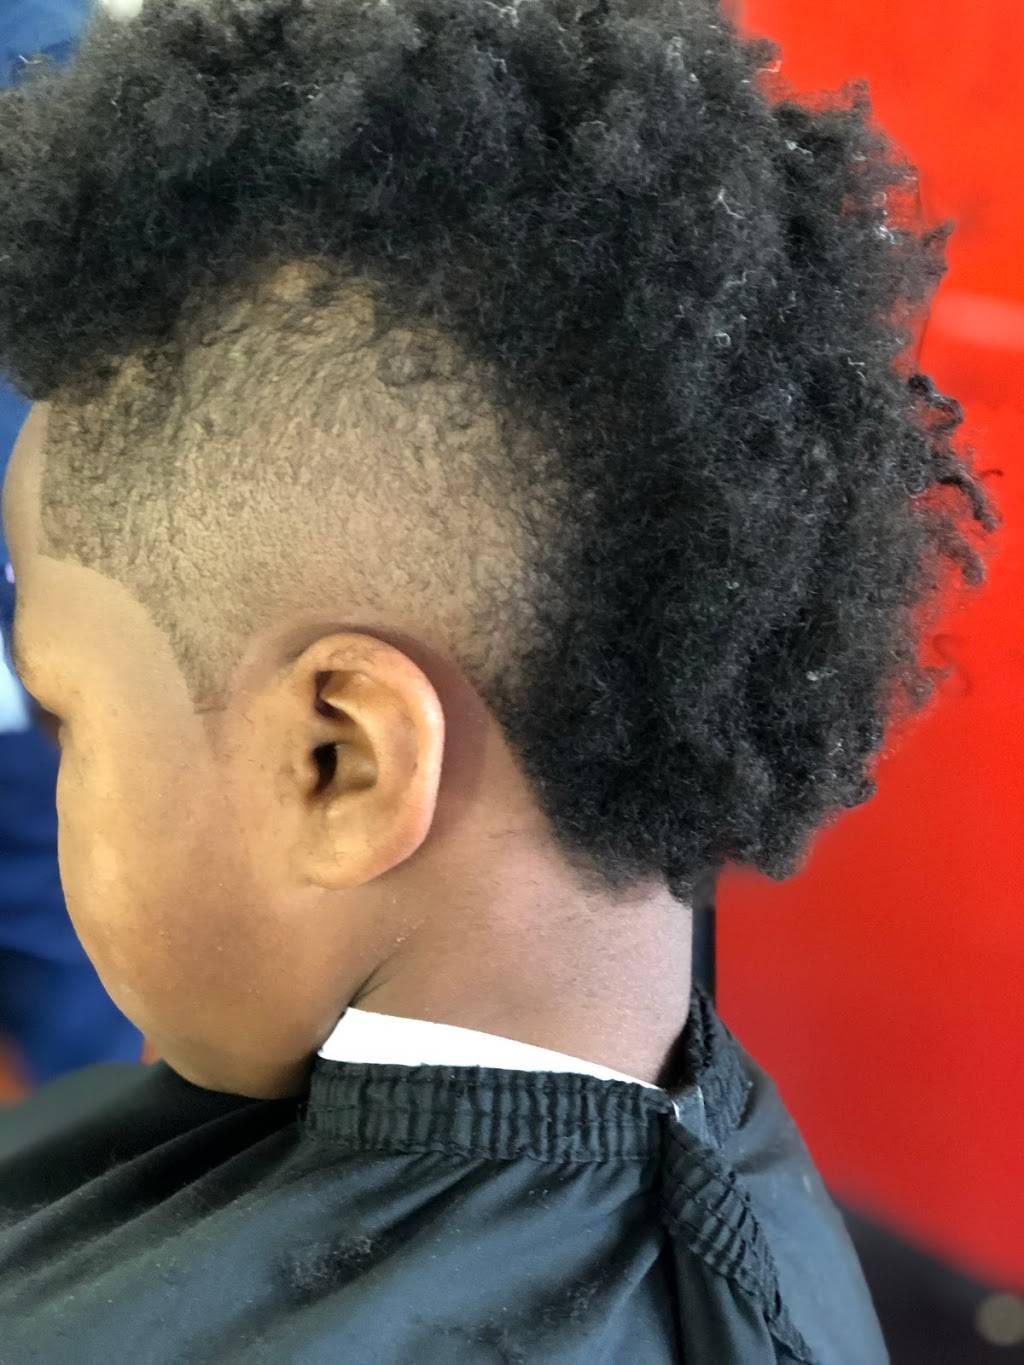 The mix up barbers and bakery | 1104 E 43rd St, Kansas City, MO 64110 | Phone: (816) 301-0295